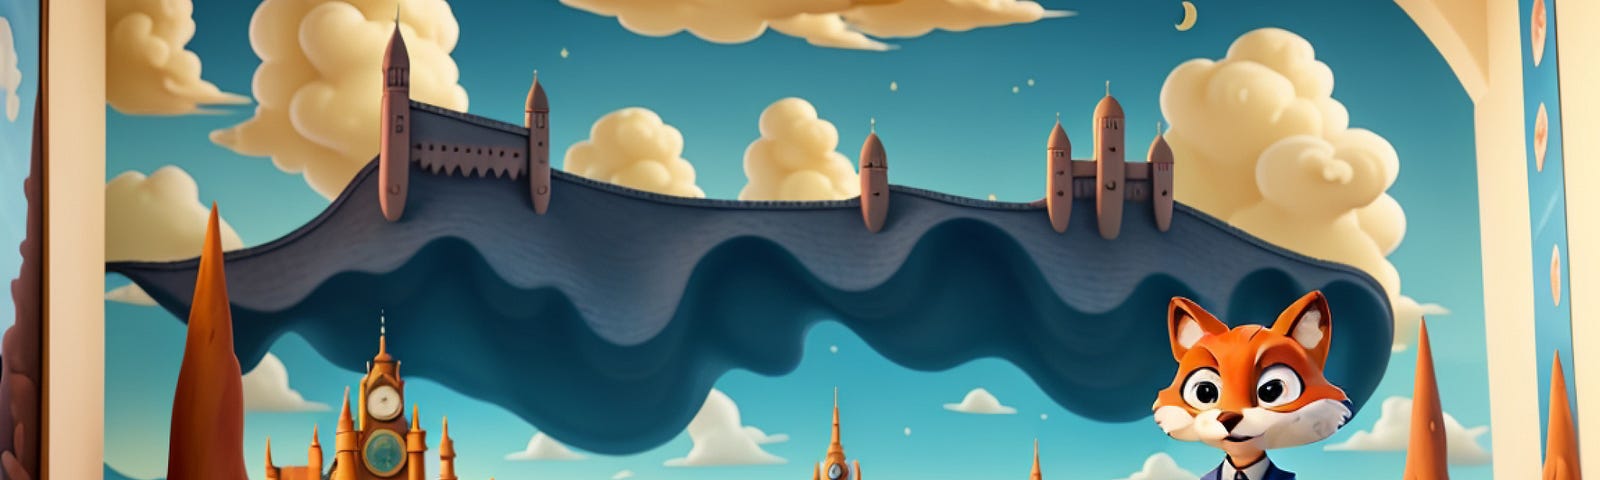 An AI-generated fox in the style of a Pixar 3D animation, wearing a blue suit with a red tie, standing in front of and in what looks like a Salvador Dalí painting on a wall, with a blue sky and fluffy white clouds and a floating black sheet peaked with what look like castle or university towers, hovering over what looks like a university, sat on a sandy pointy desert landscape.